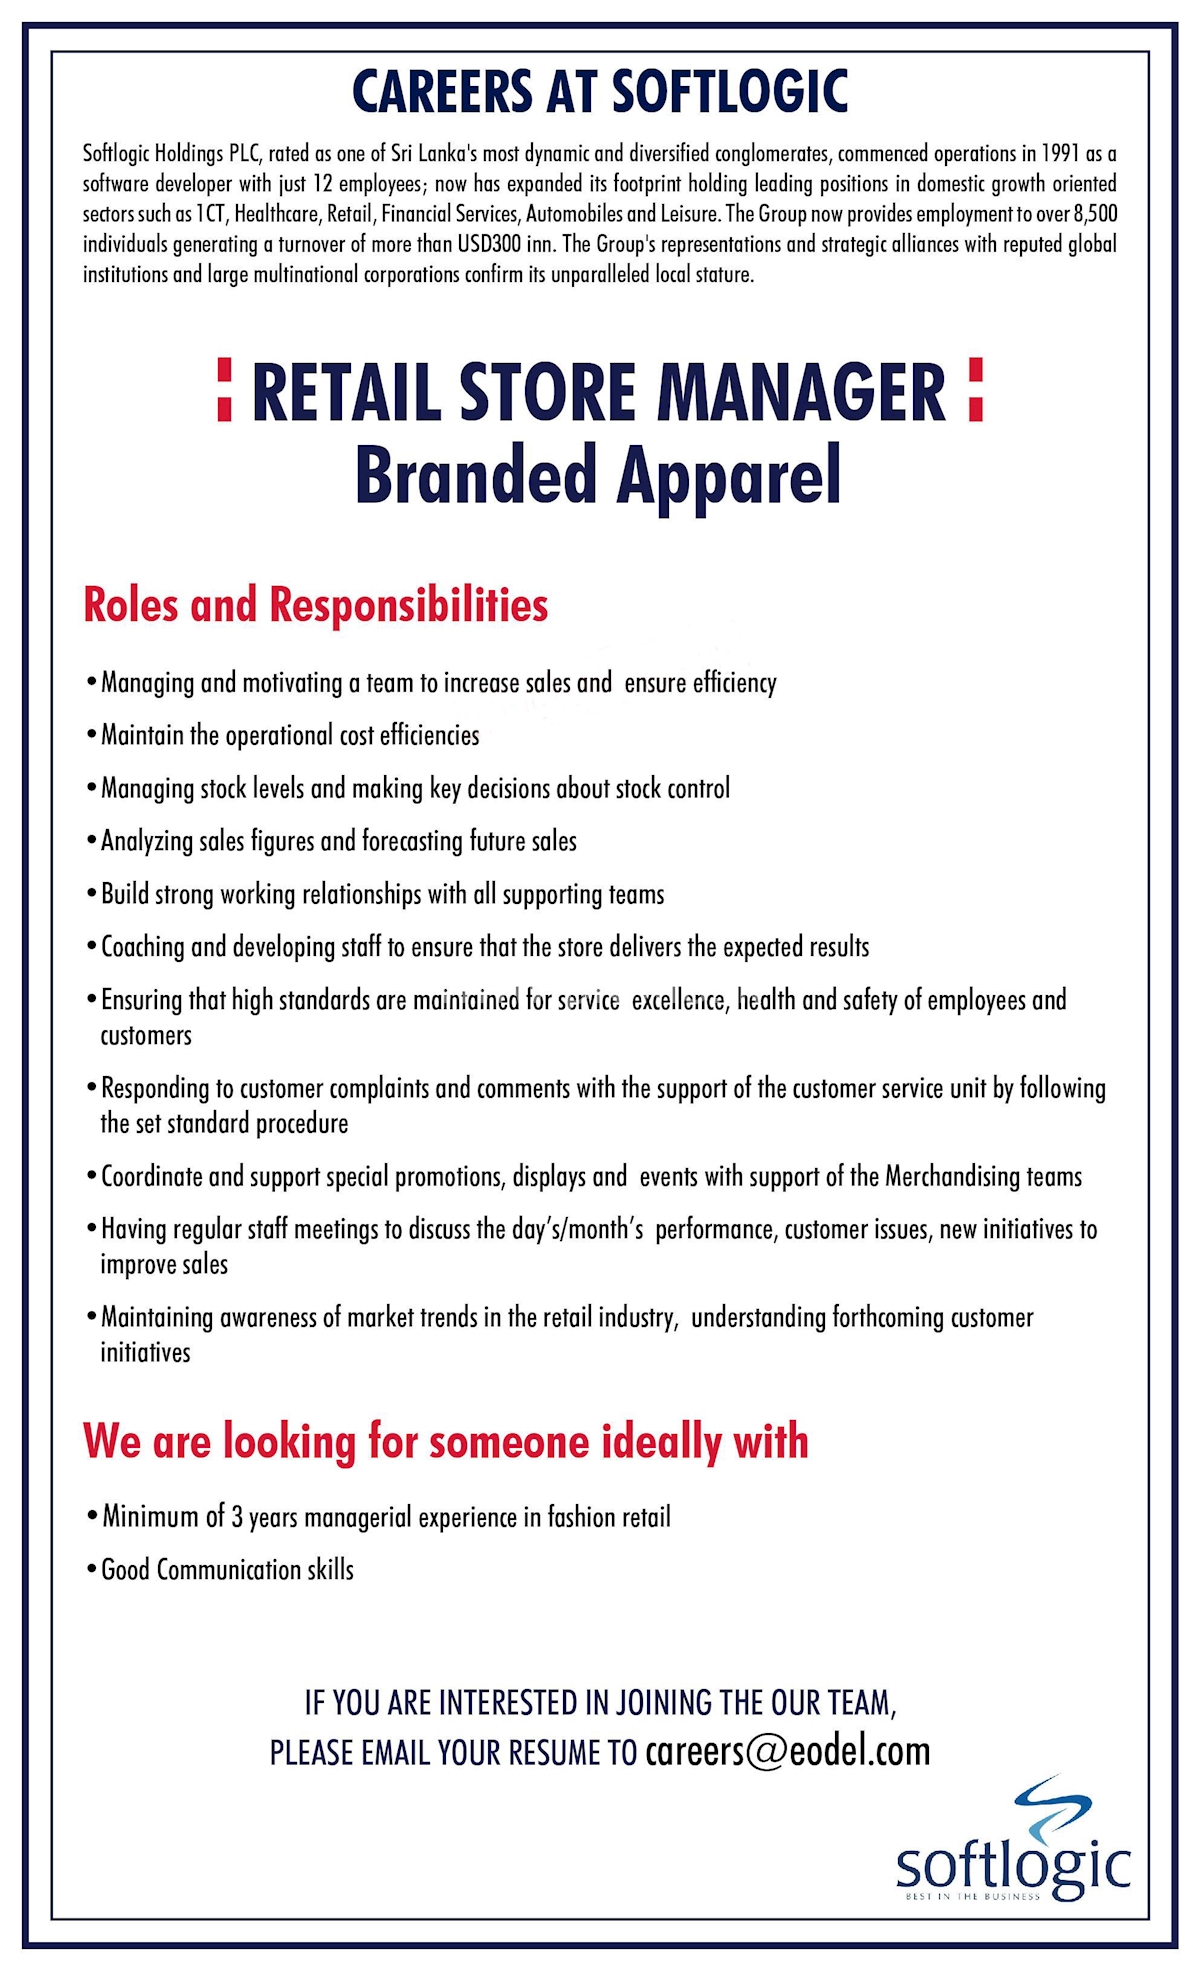 Retail Store Manager - Branded Apparel